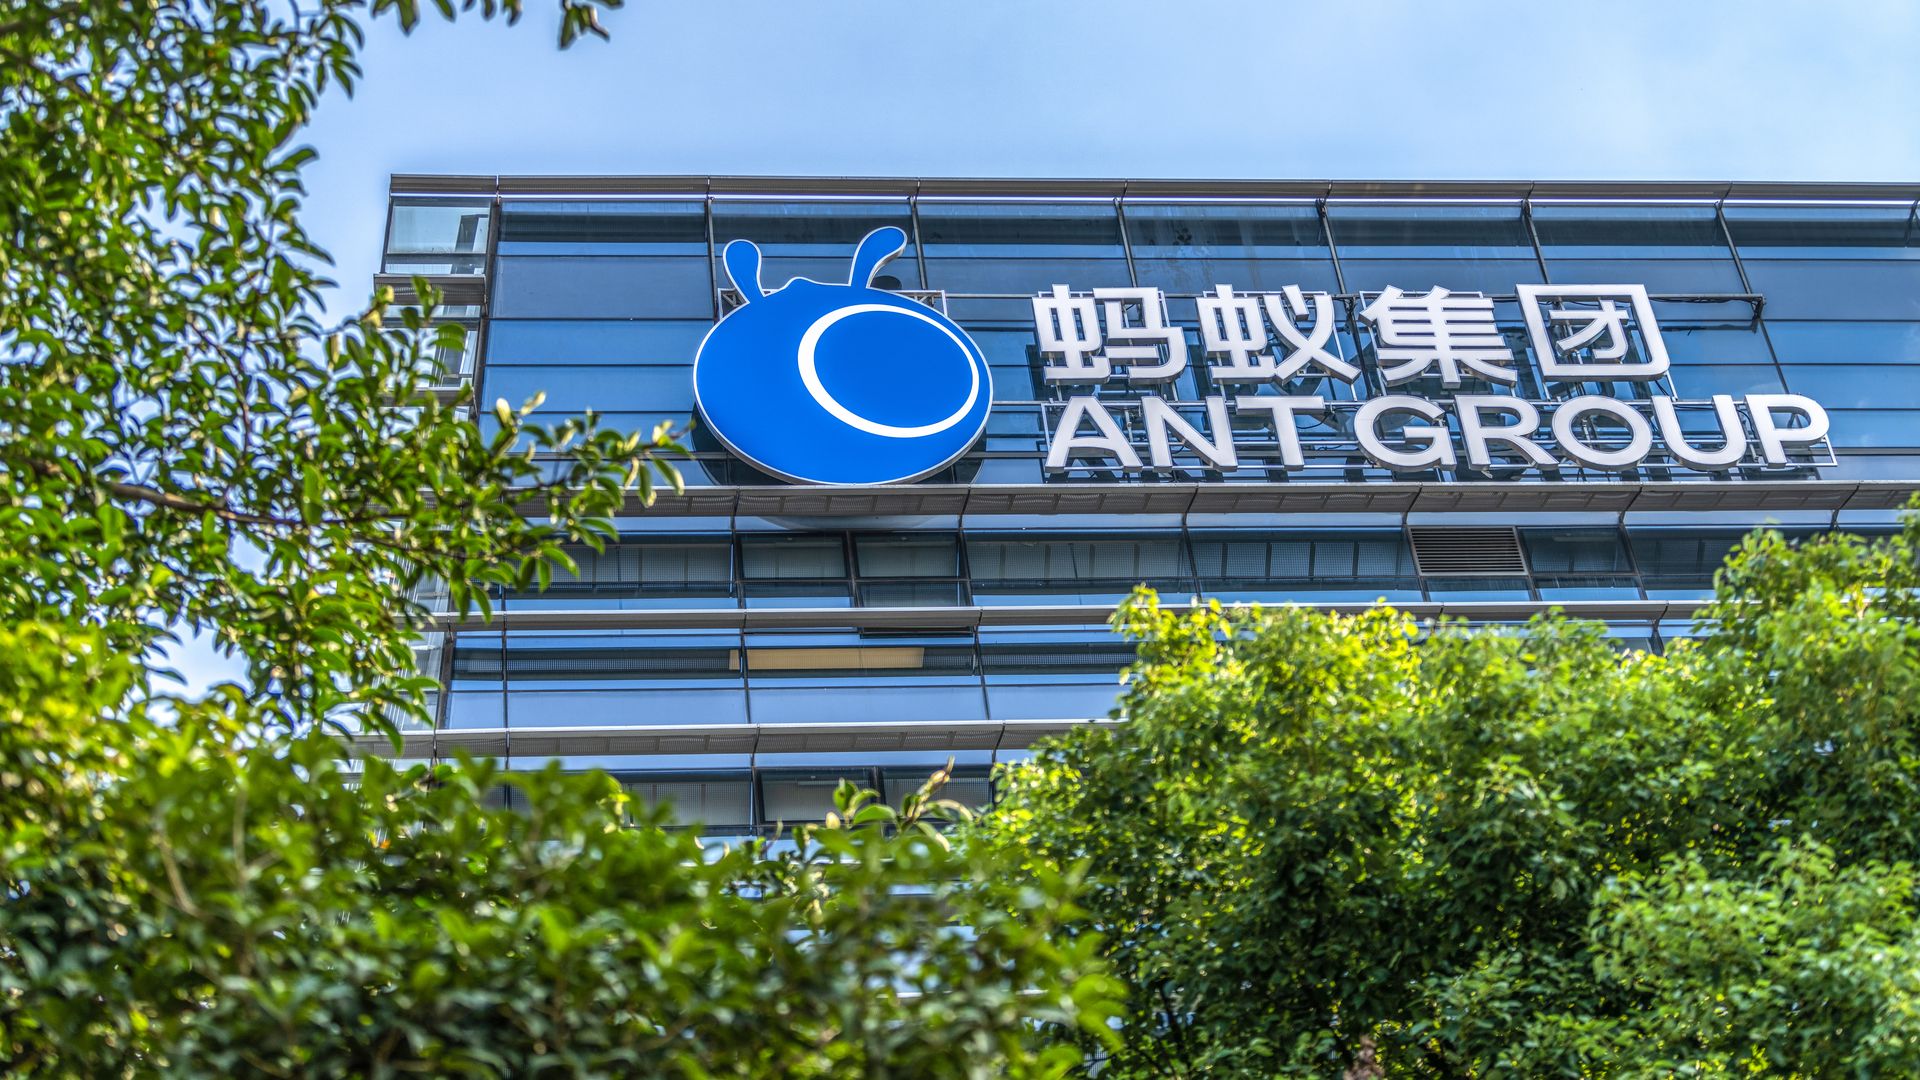 Ant Group headquarters in China.